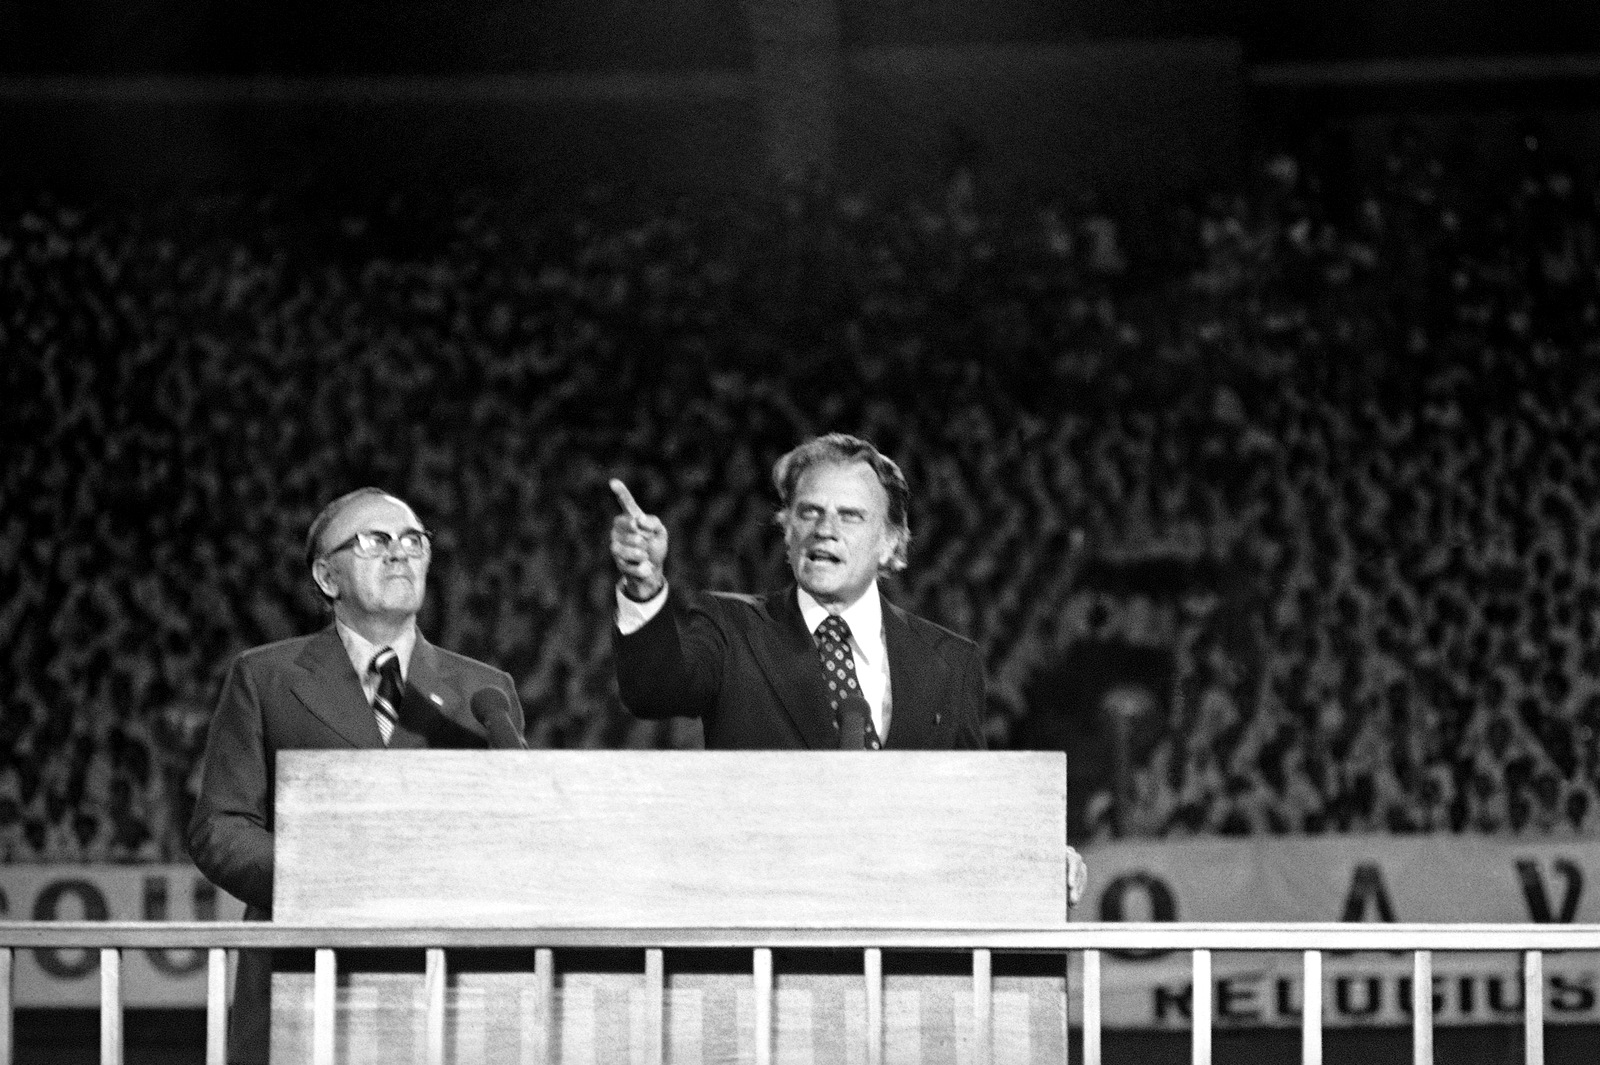 Rev. Billy Graham, flanked by his Portuguese interpreter, told a crowd of 85,000 persons in Rio’s Maracana Stadium in Rio De Janeiro, Oct. 3, 1974, that many of our world leaders are warning about a third world war man has proven himself to be a moral failure. God is the only hope at this hour. (AP Photo)